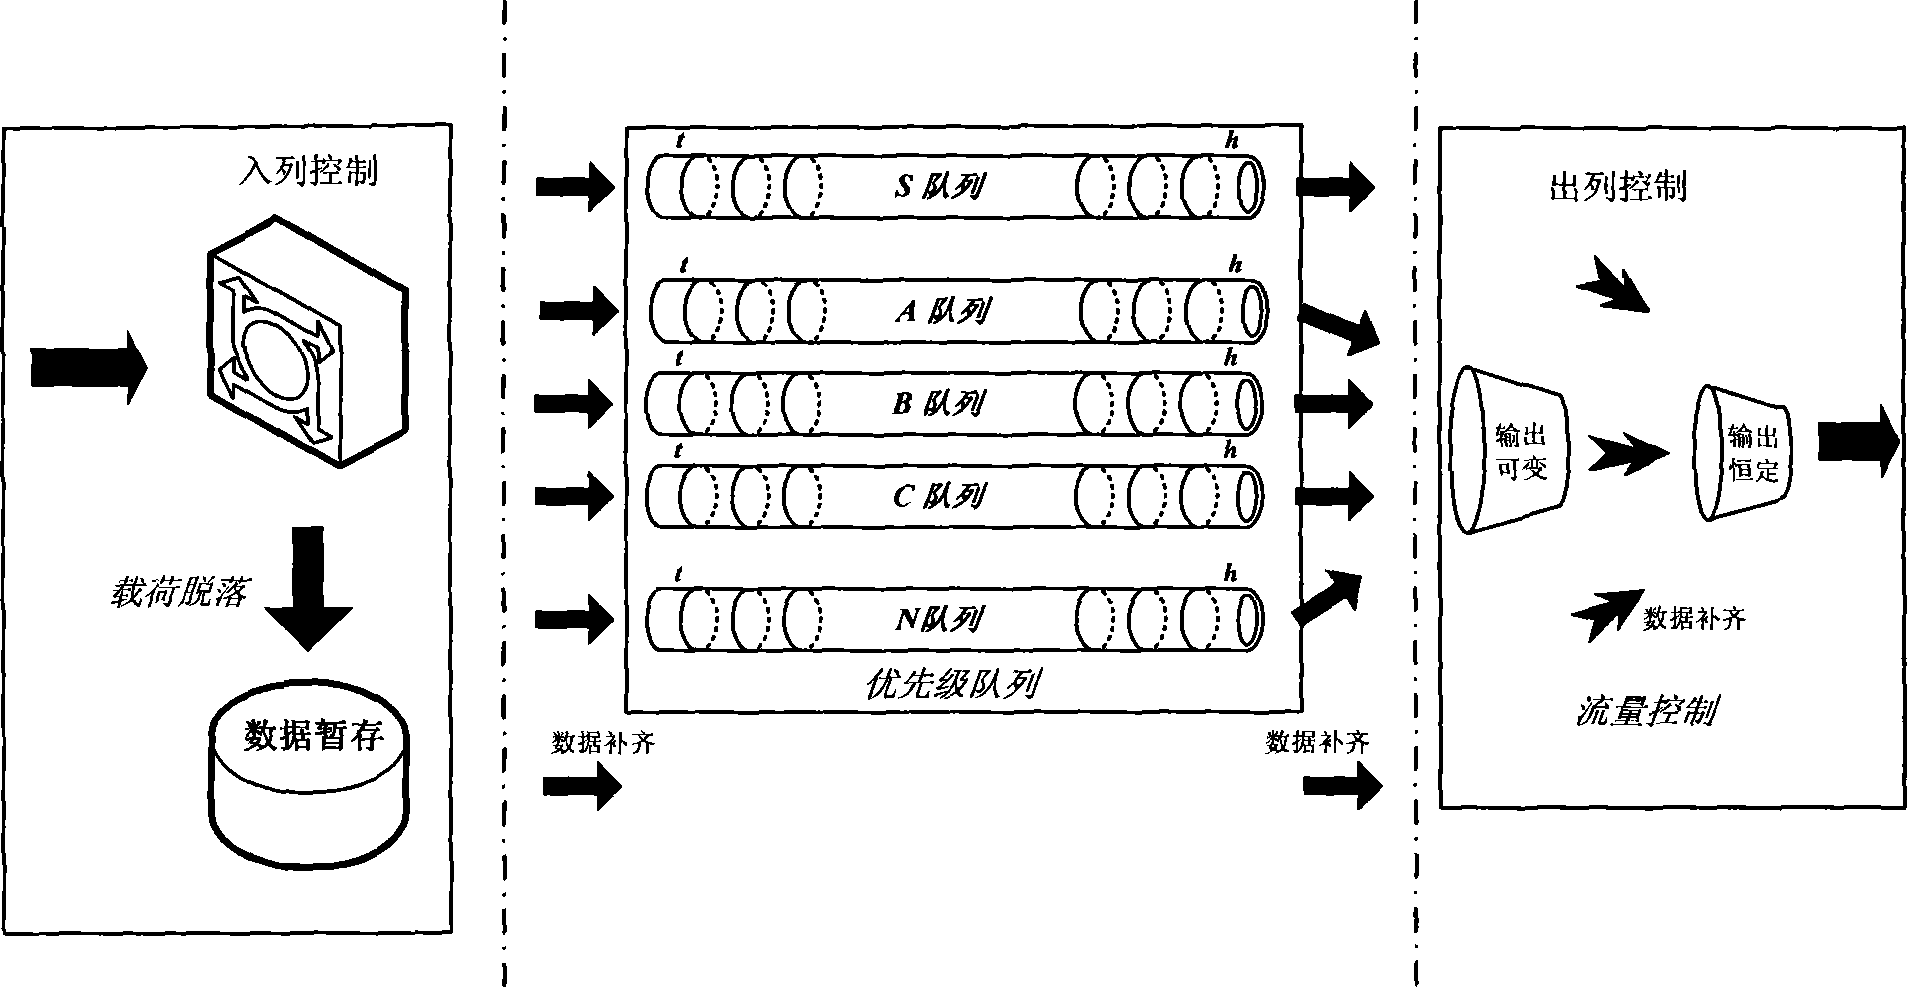 Transmission control method for data processing of real-time monitoring system